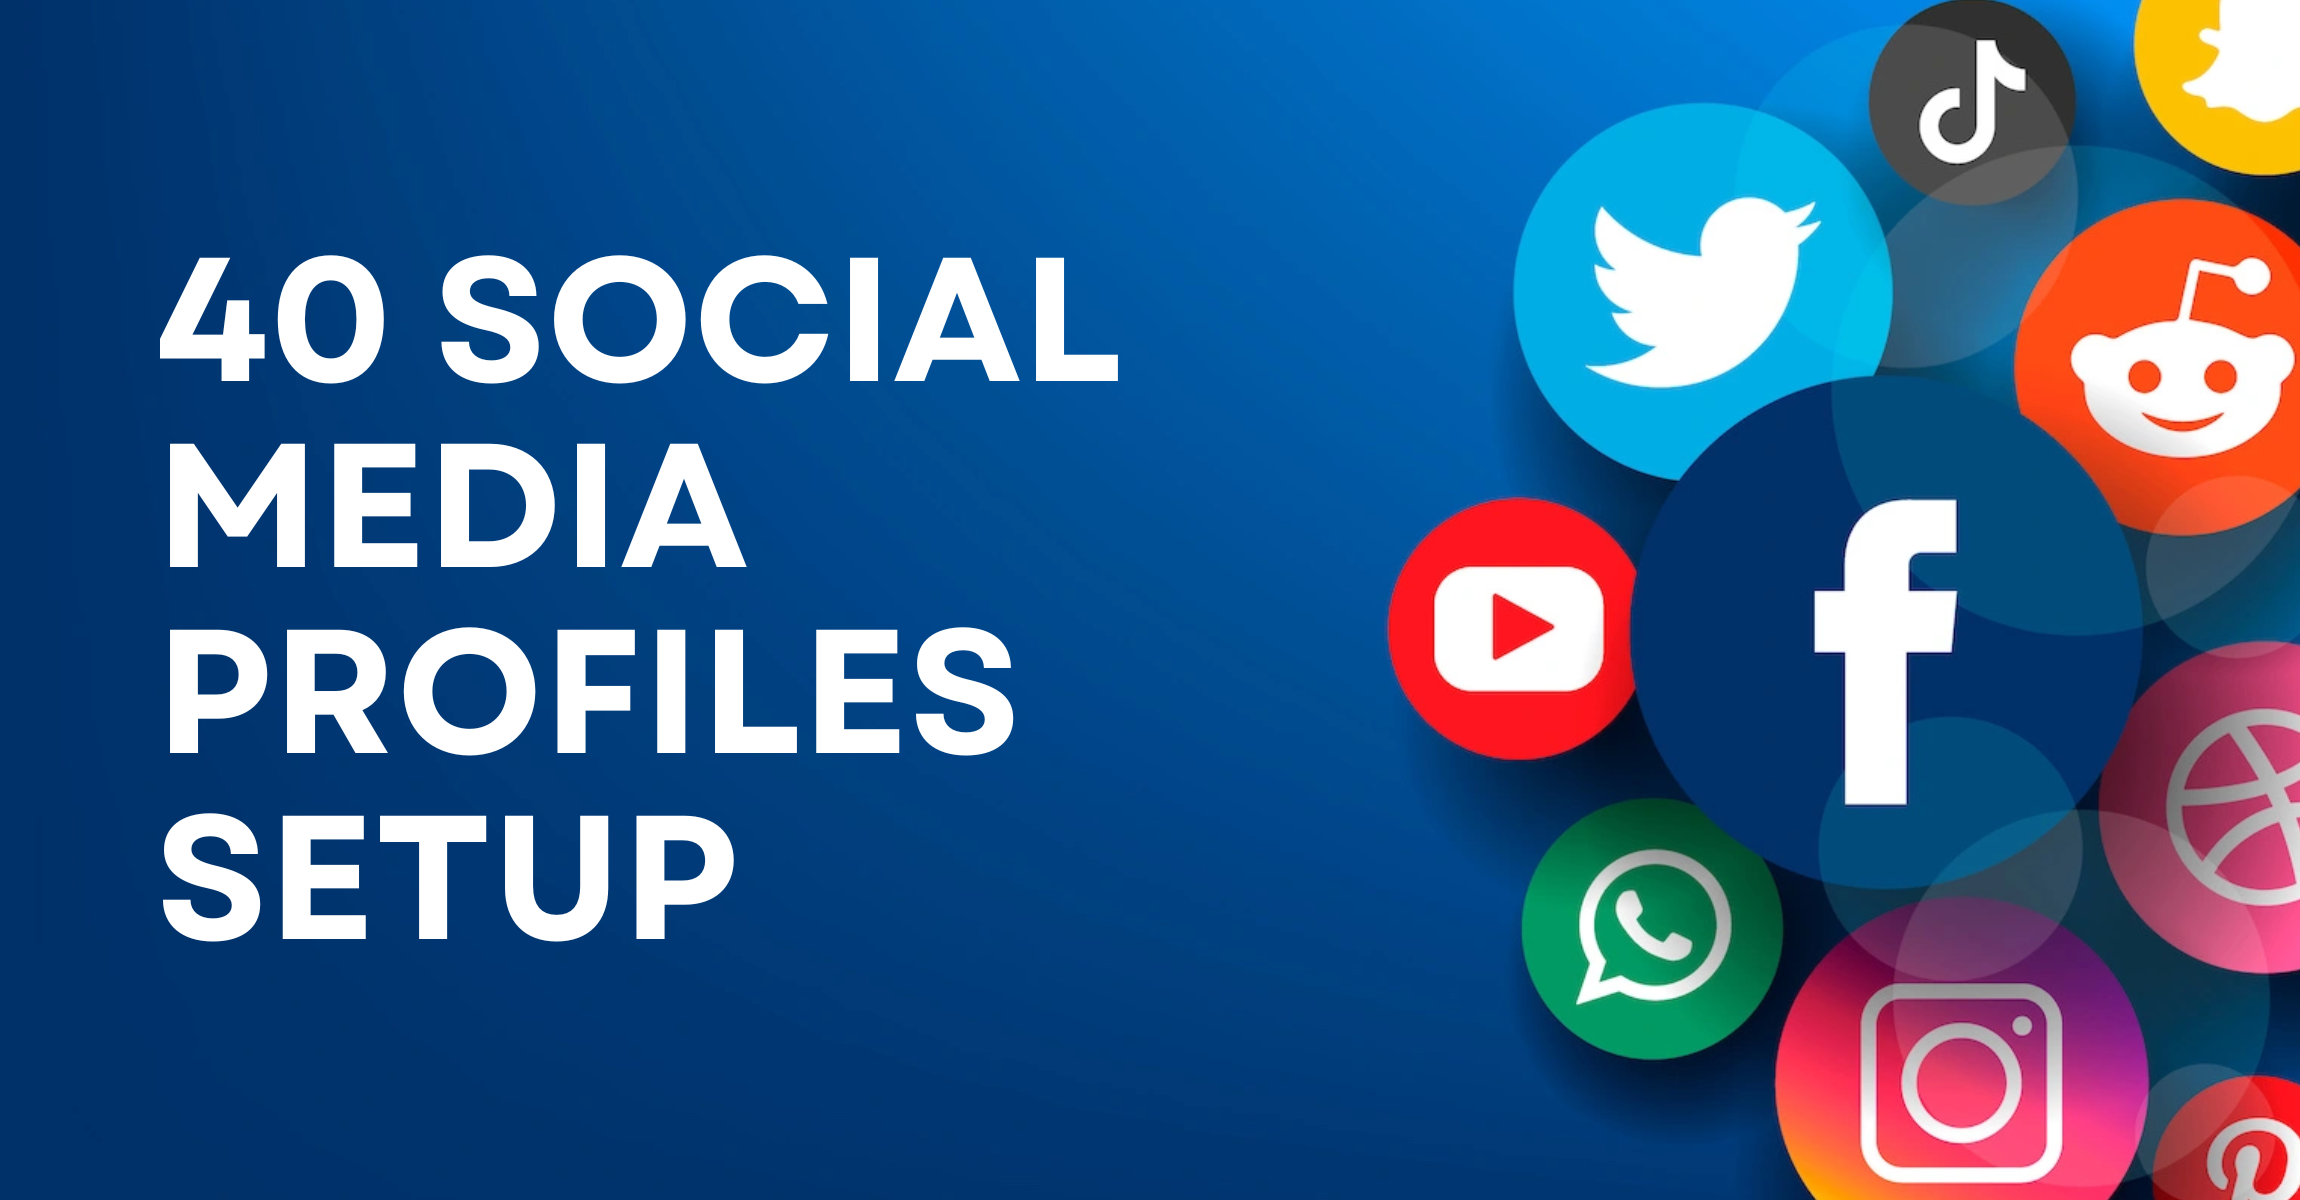 108234Create and Set Up 40 social media profiles for you business